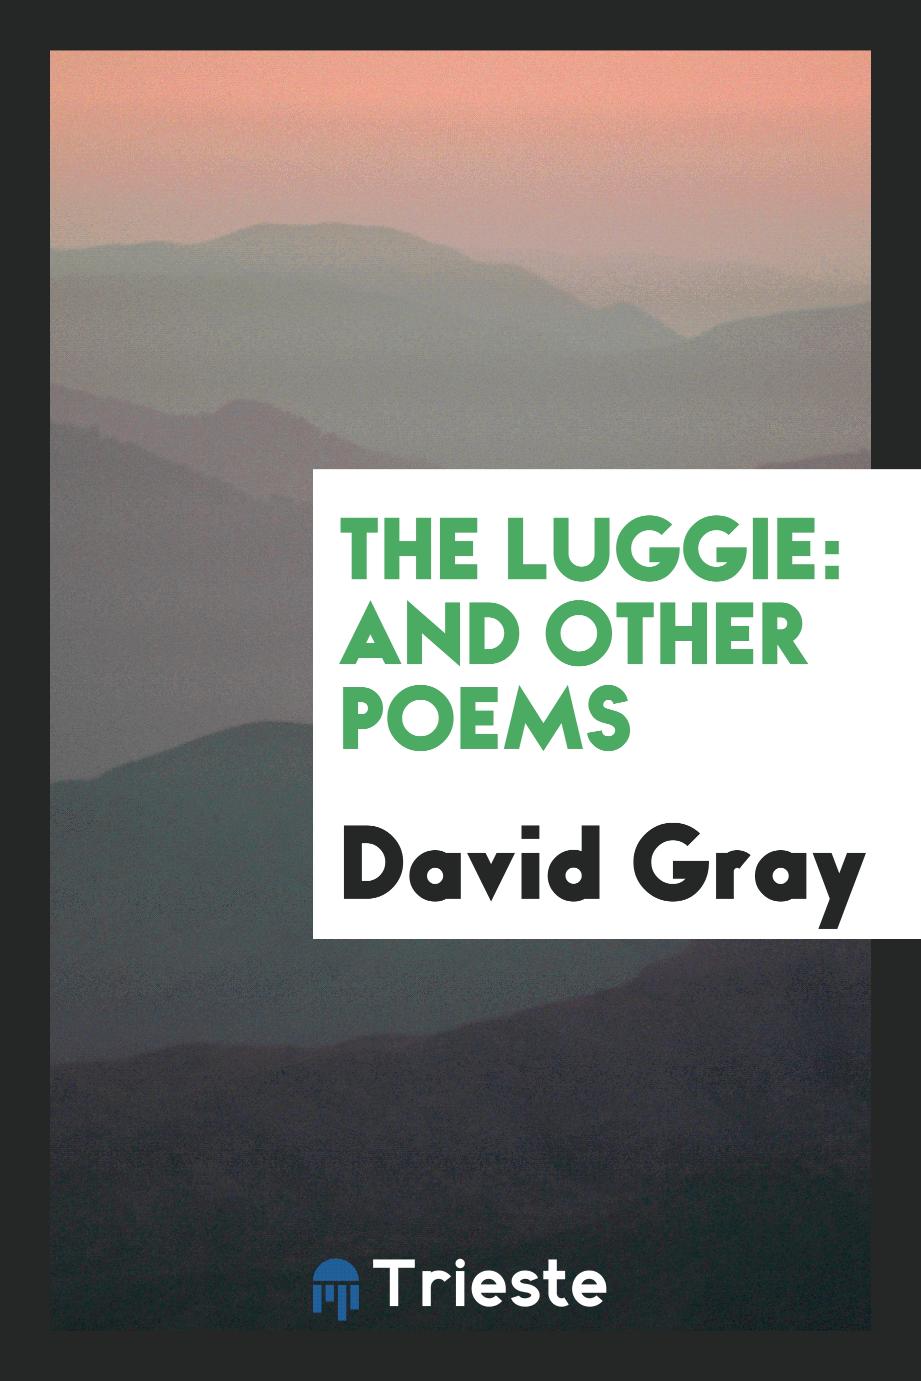 The Luggie: and other poems